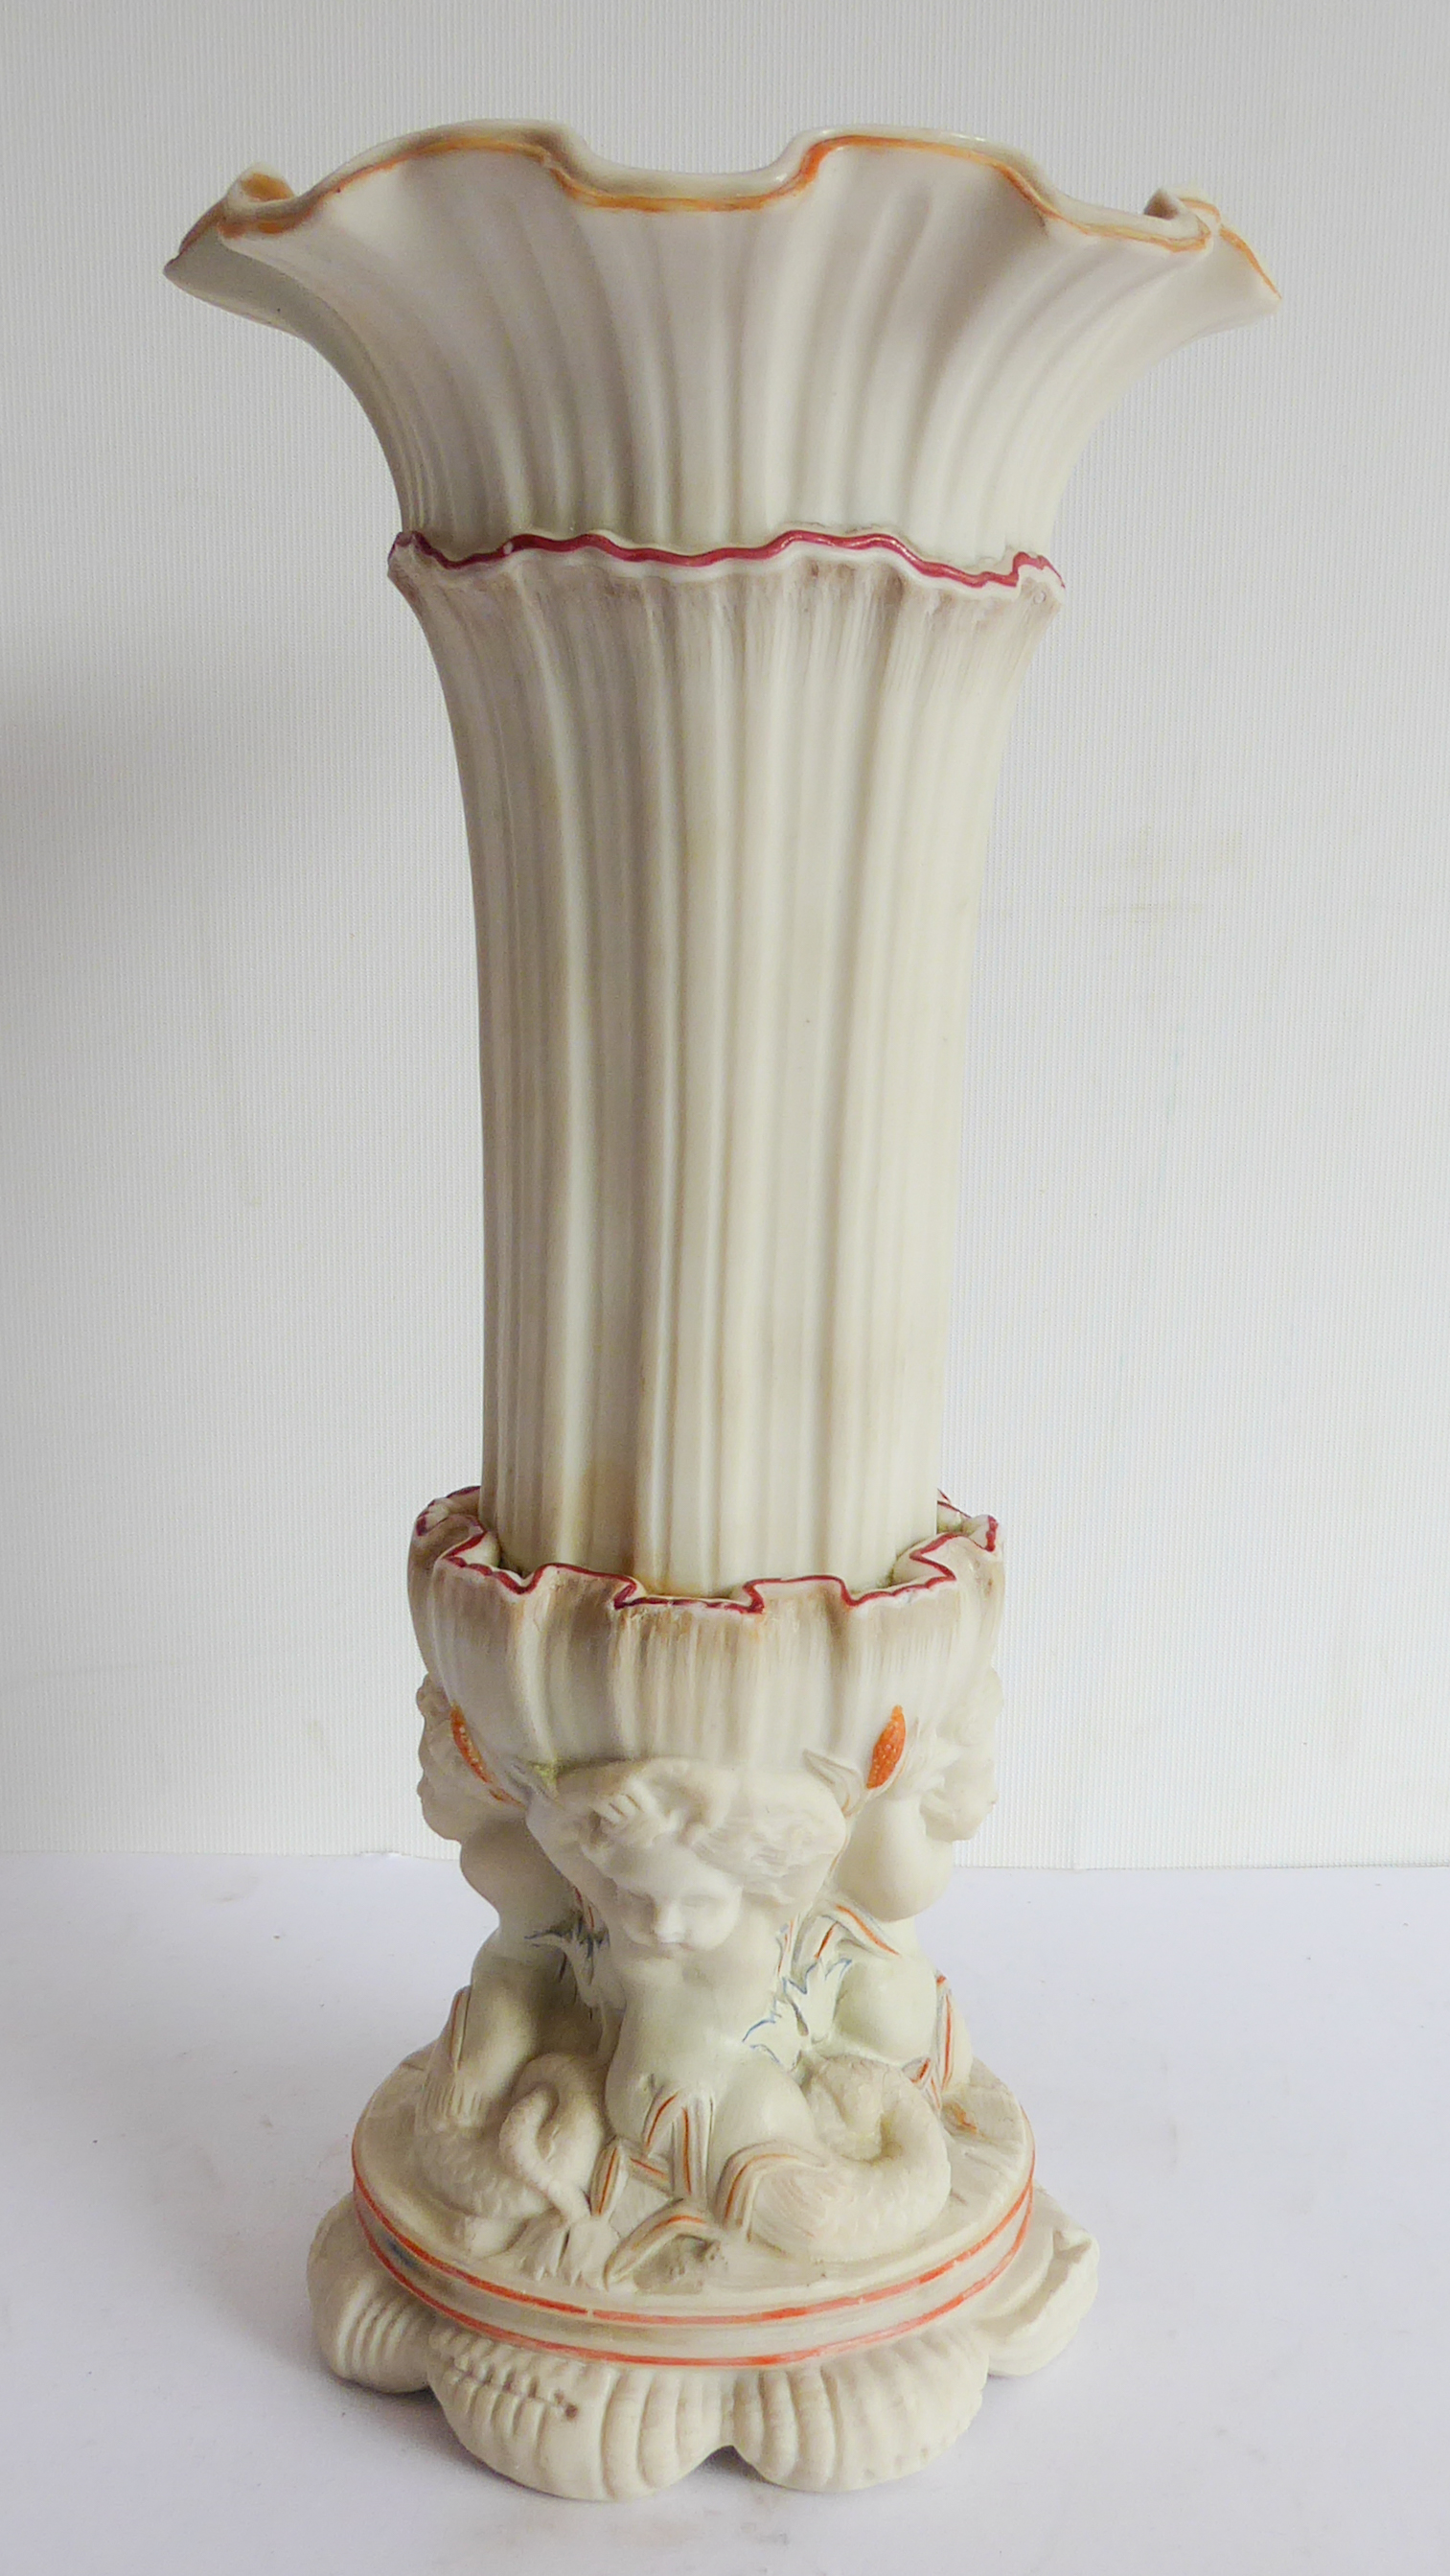 An unusual 19th century Parian ware vase of trumpet form: the gilded flowerhead-shaped top above a